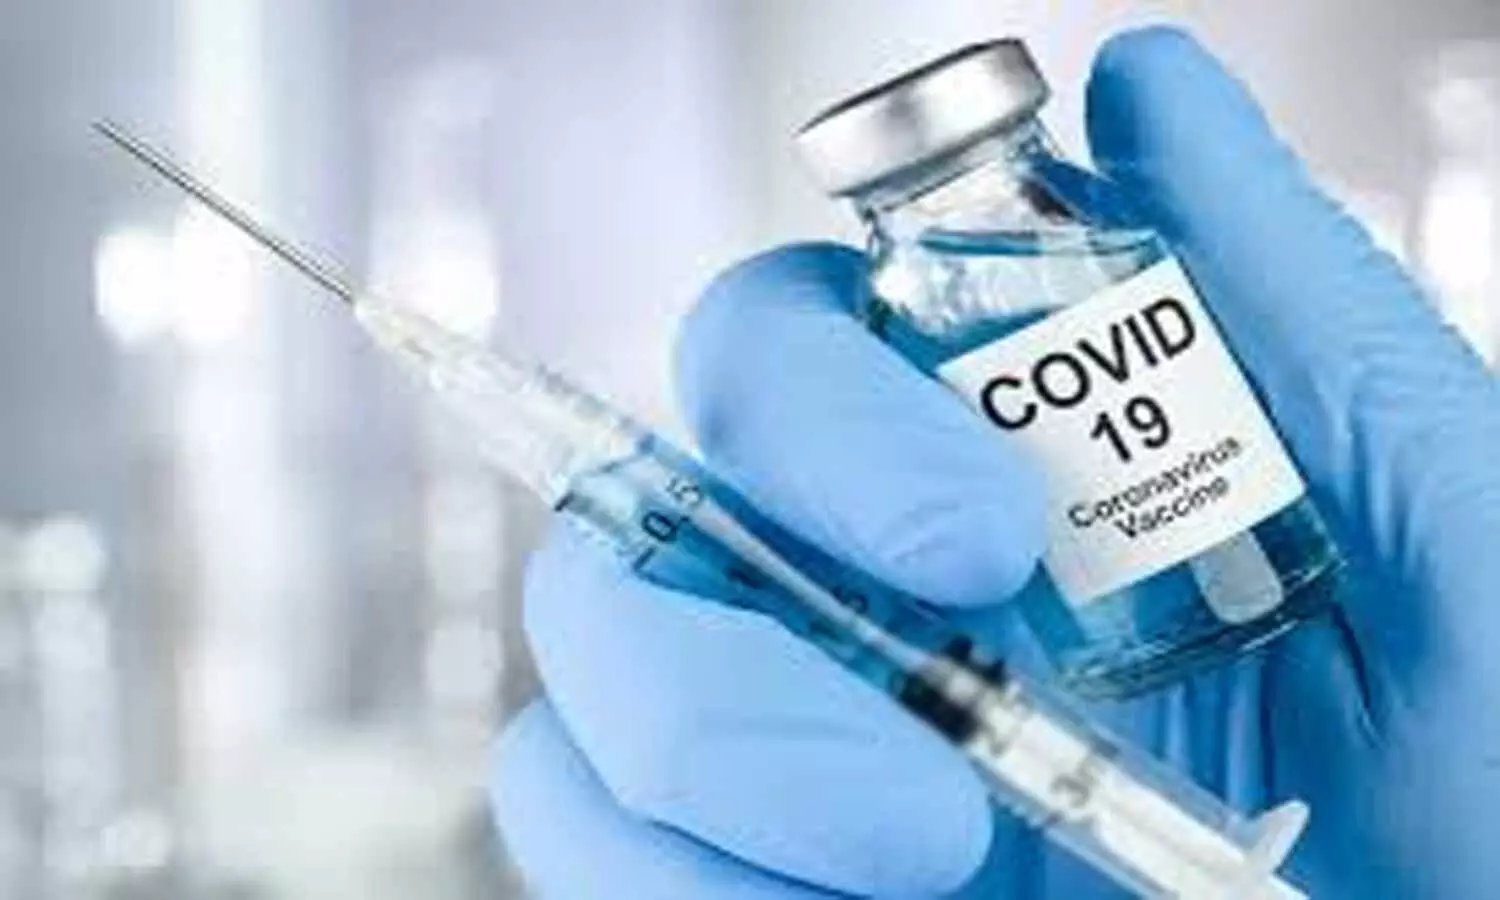 Active Covid-19 cases dip further, over 10 lakh beneficiaries vaccinated: Health Ministry